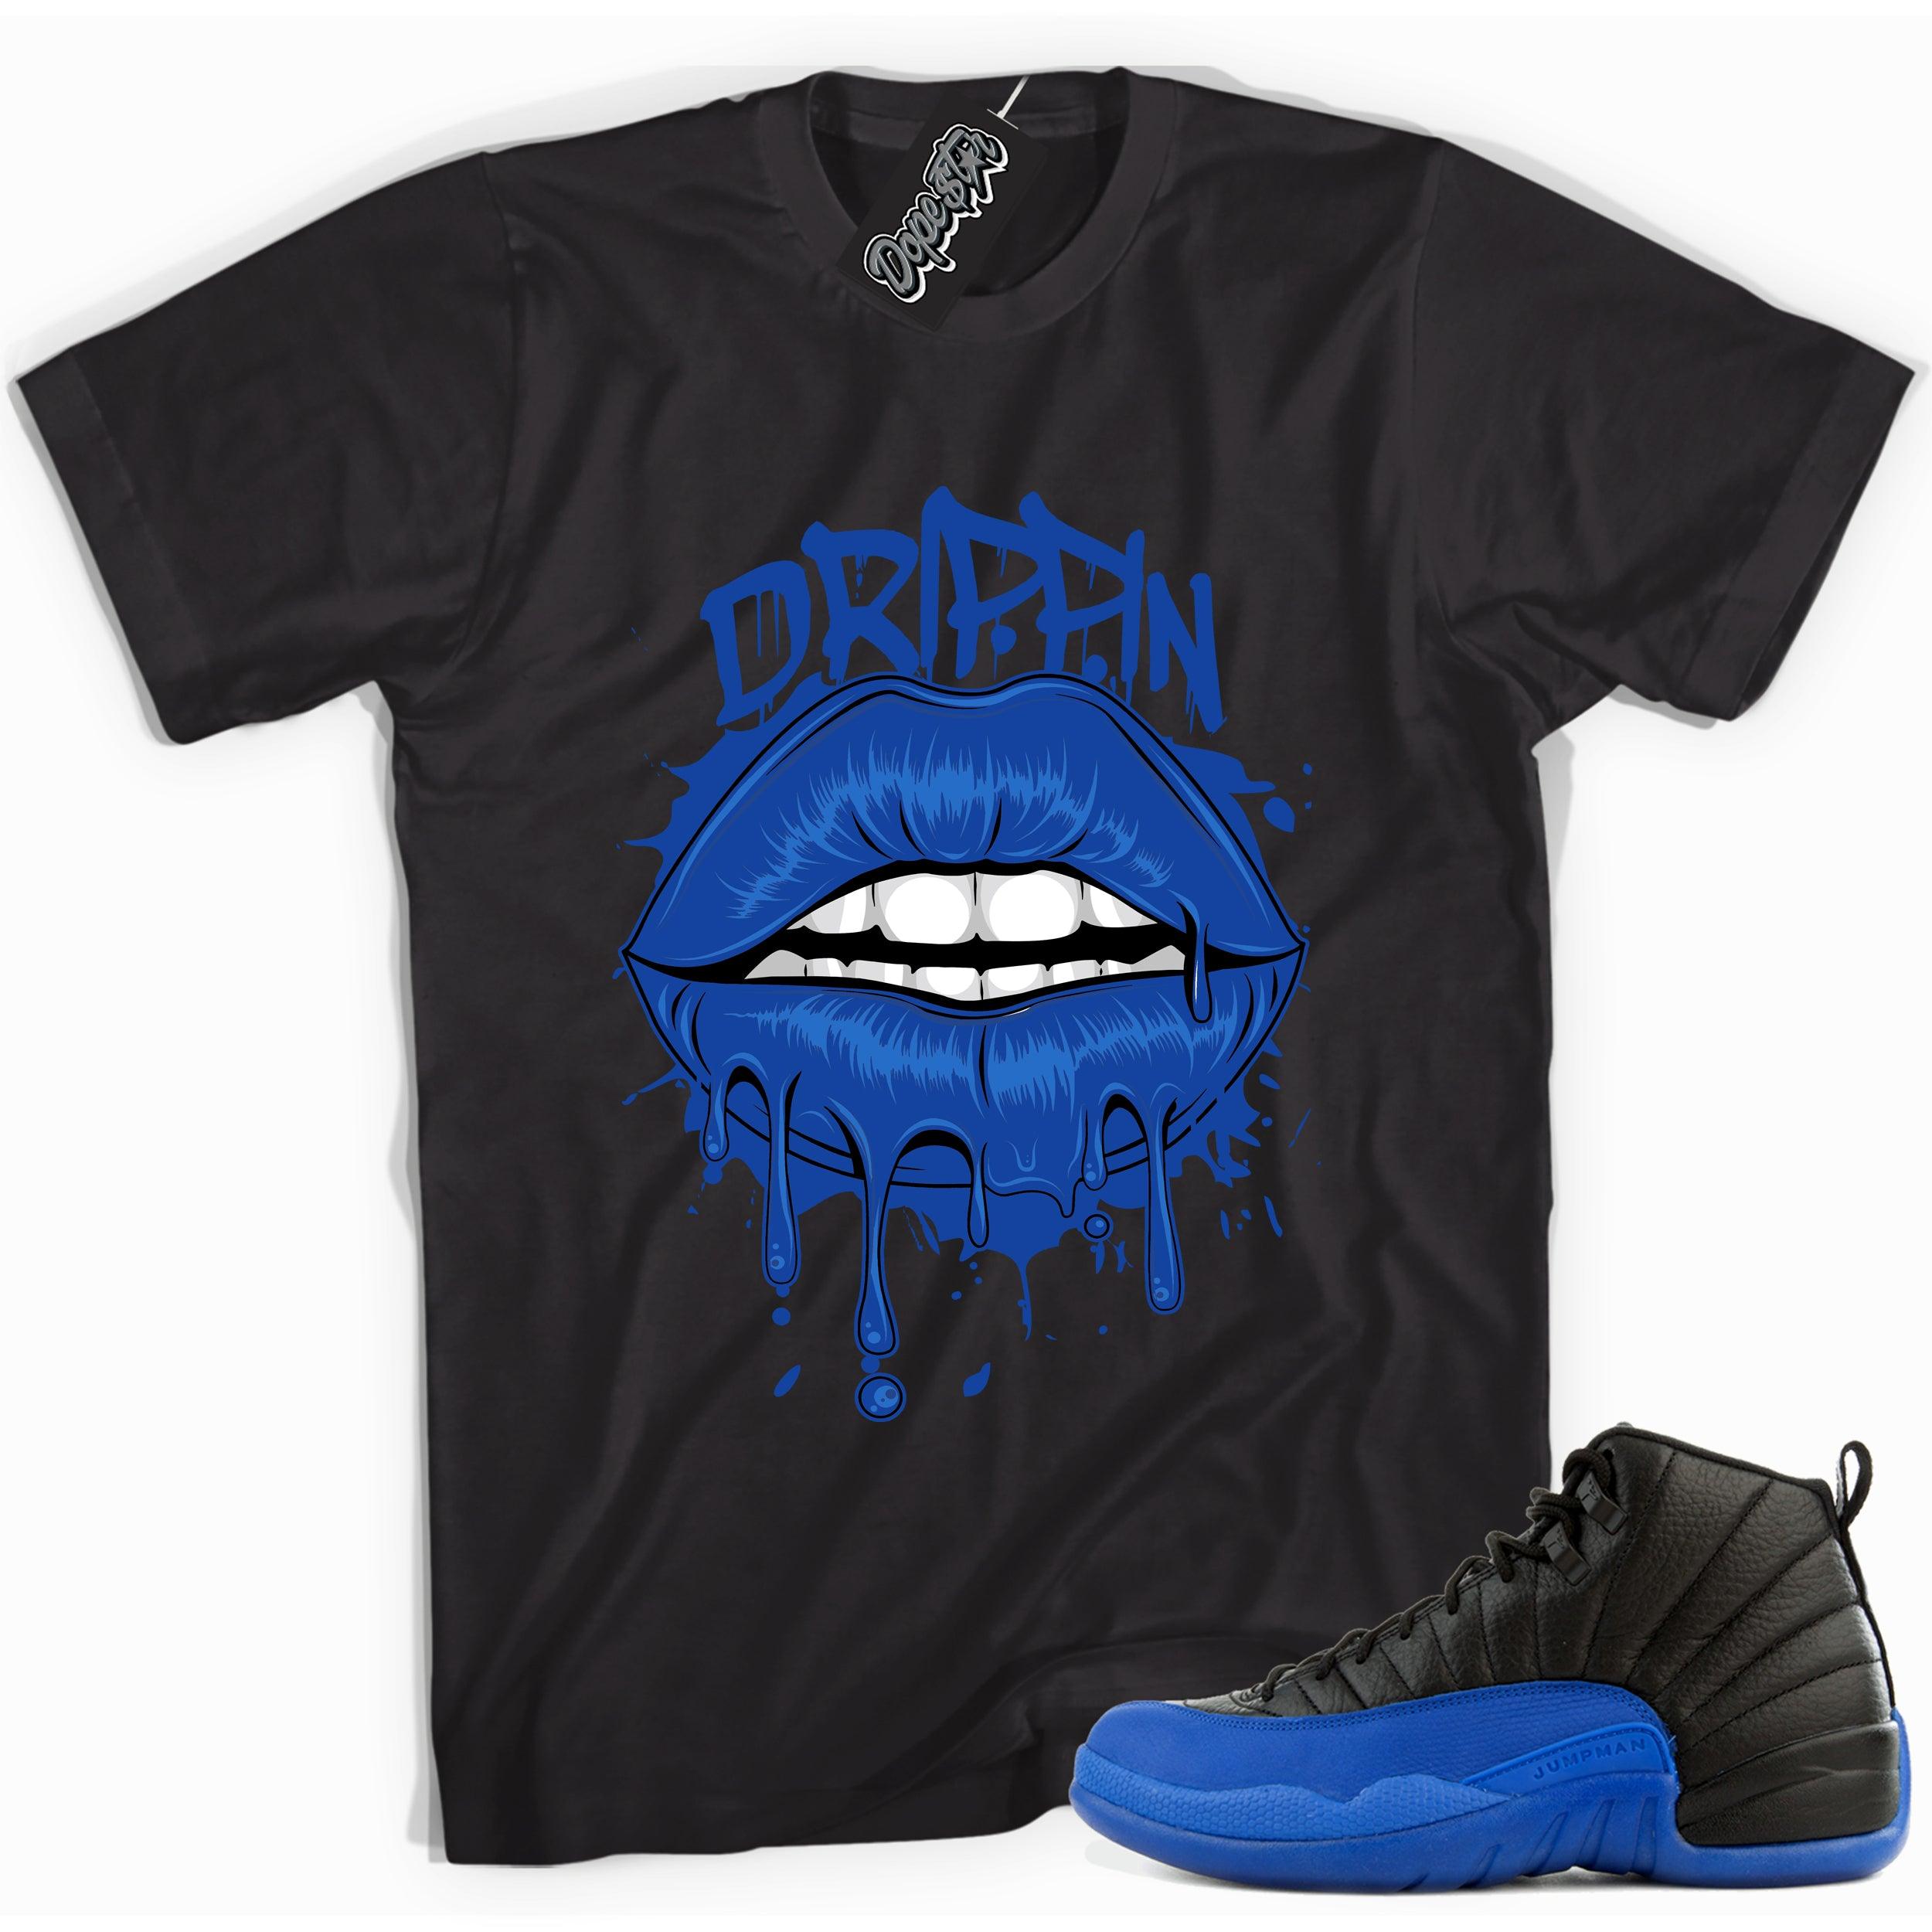 Cool black graphic tee with 'drippin' print, that perfectly matches  Air Jordan 12 Retro Black Game Royal sneakers.